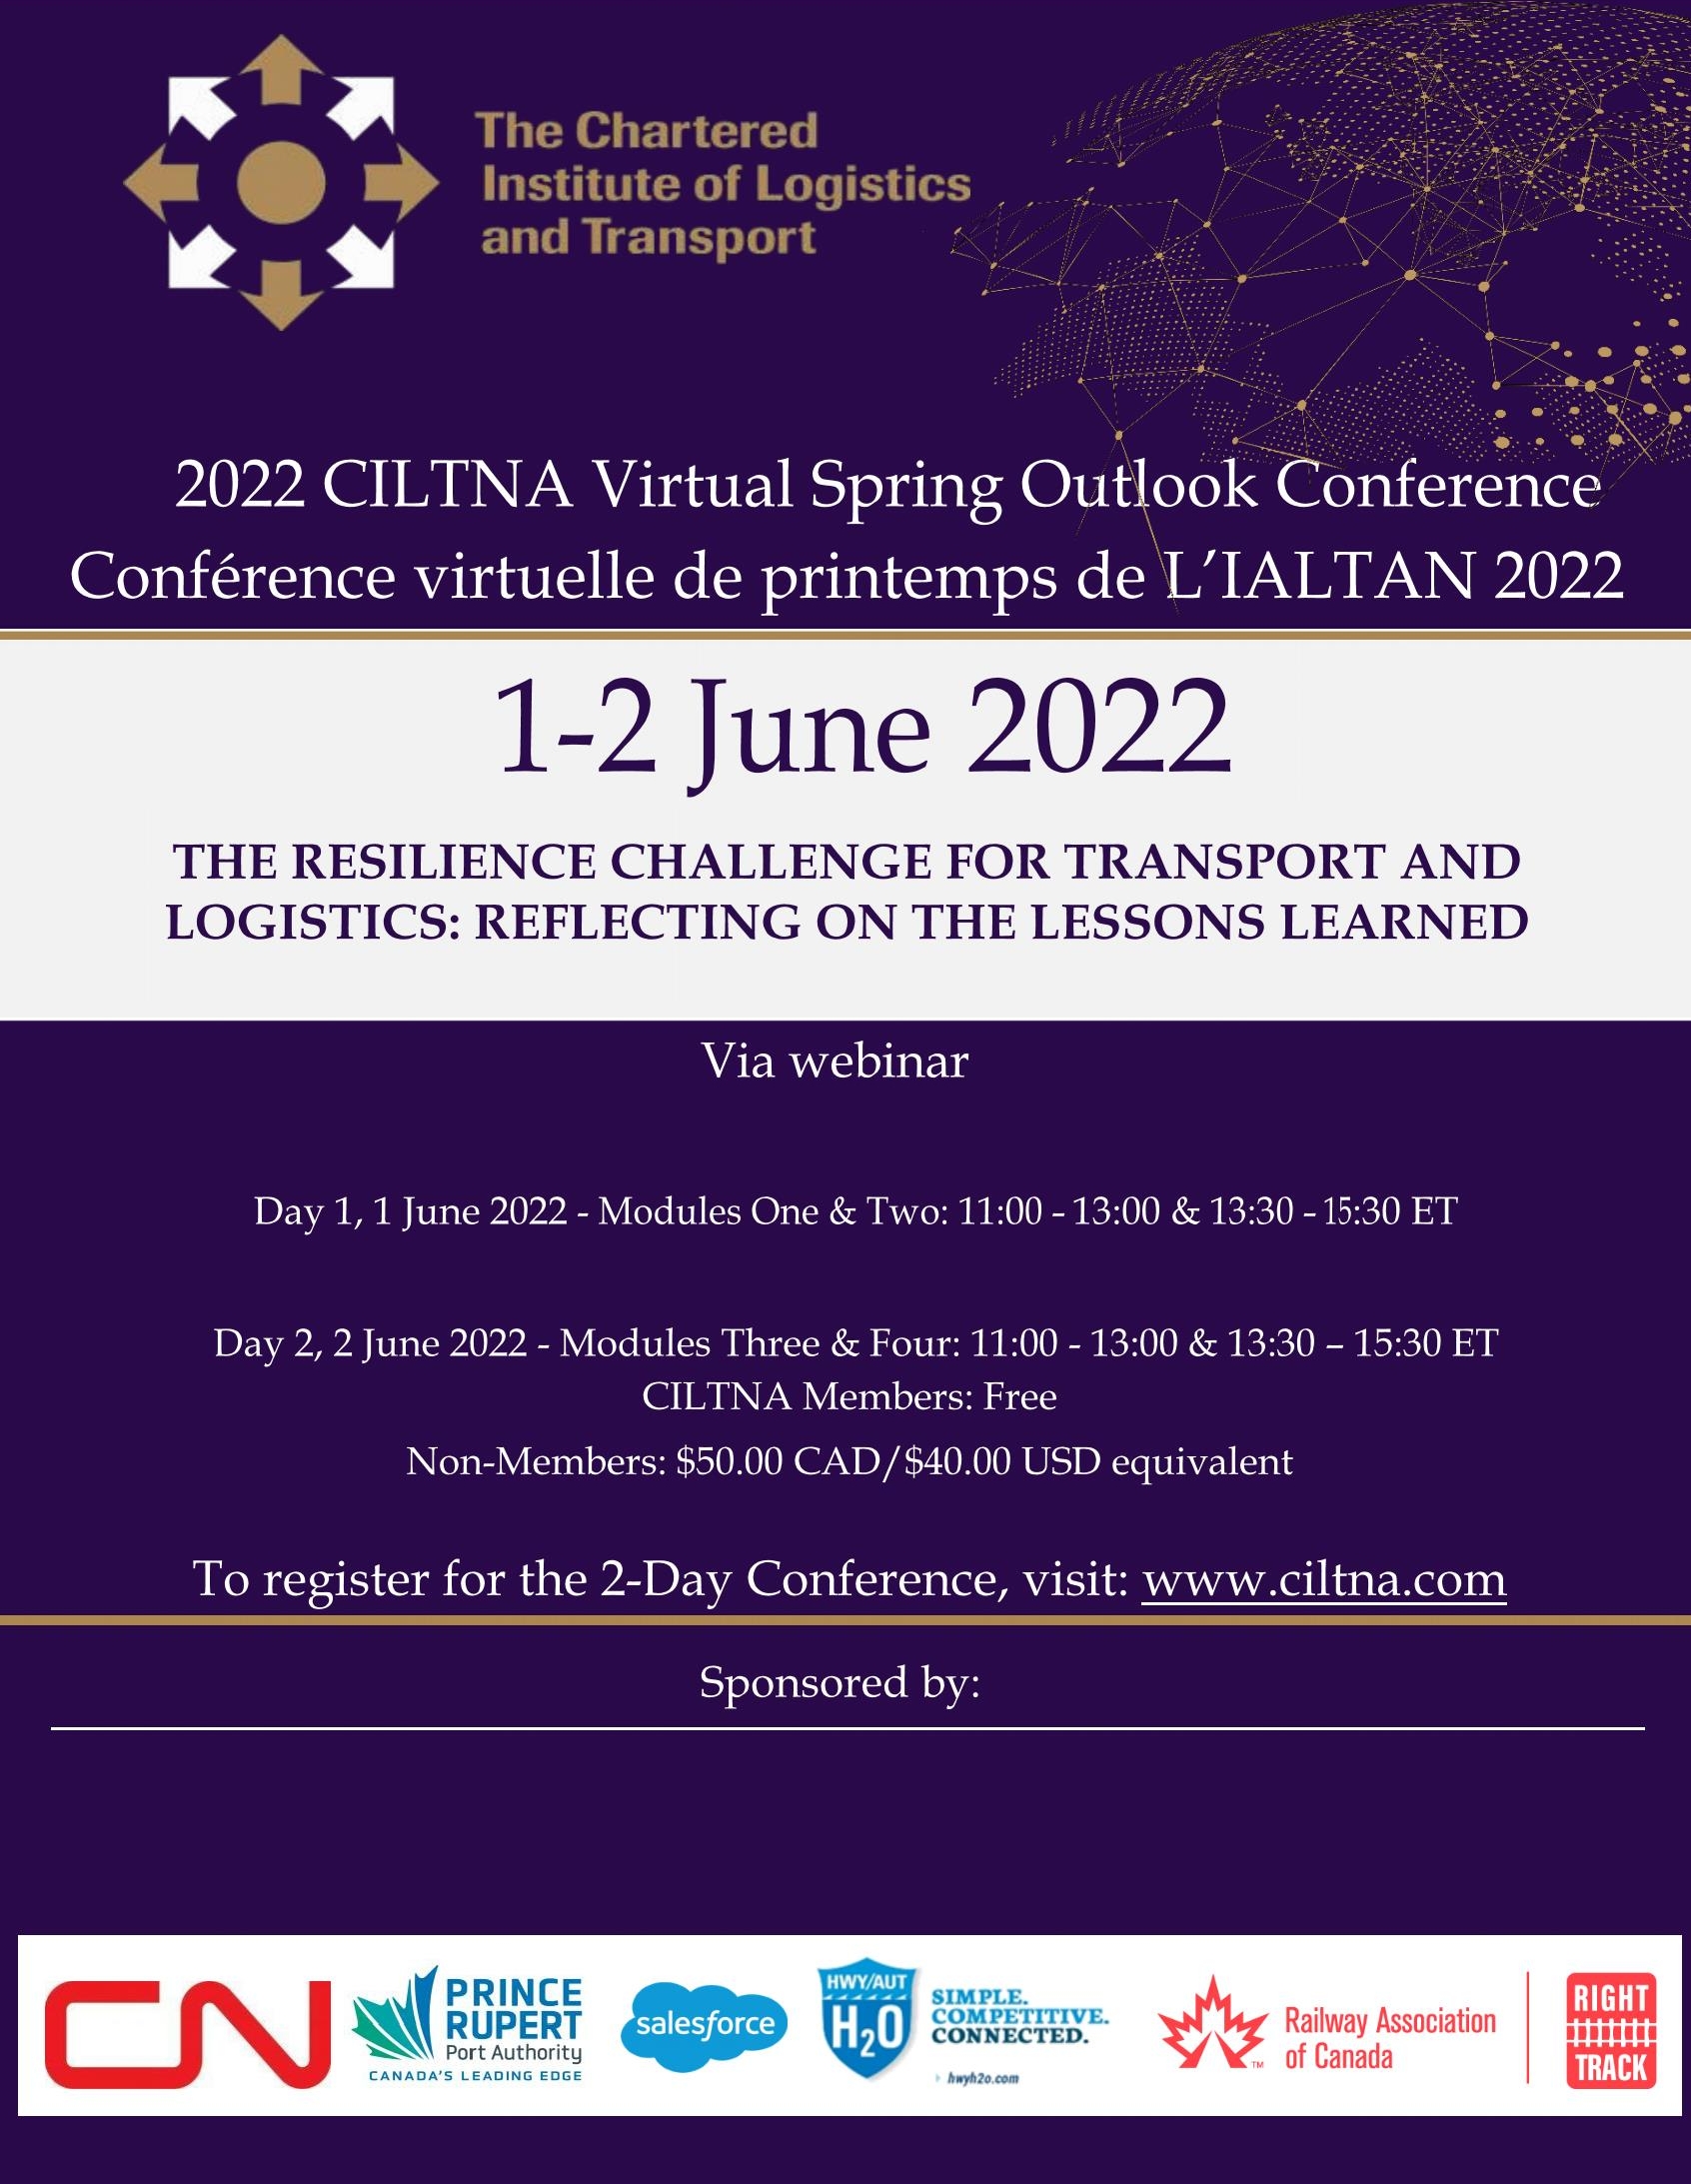 REGISTER NOW! - 2022 CILTNA Virtual Spring Outlook Conference: The Resilience Challenge for Transport and Logistics: Reflecting on the Lessons Learned